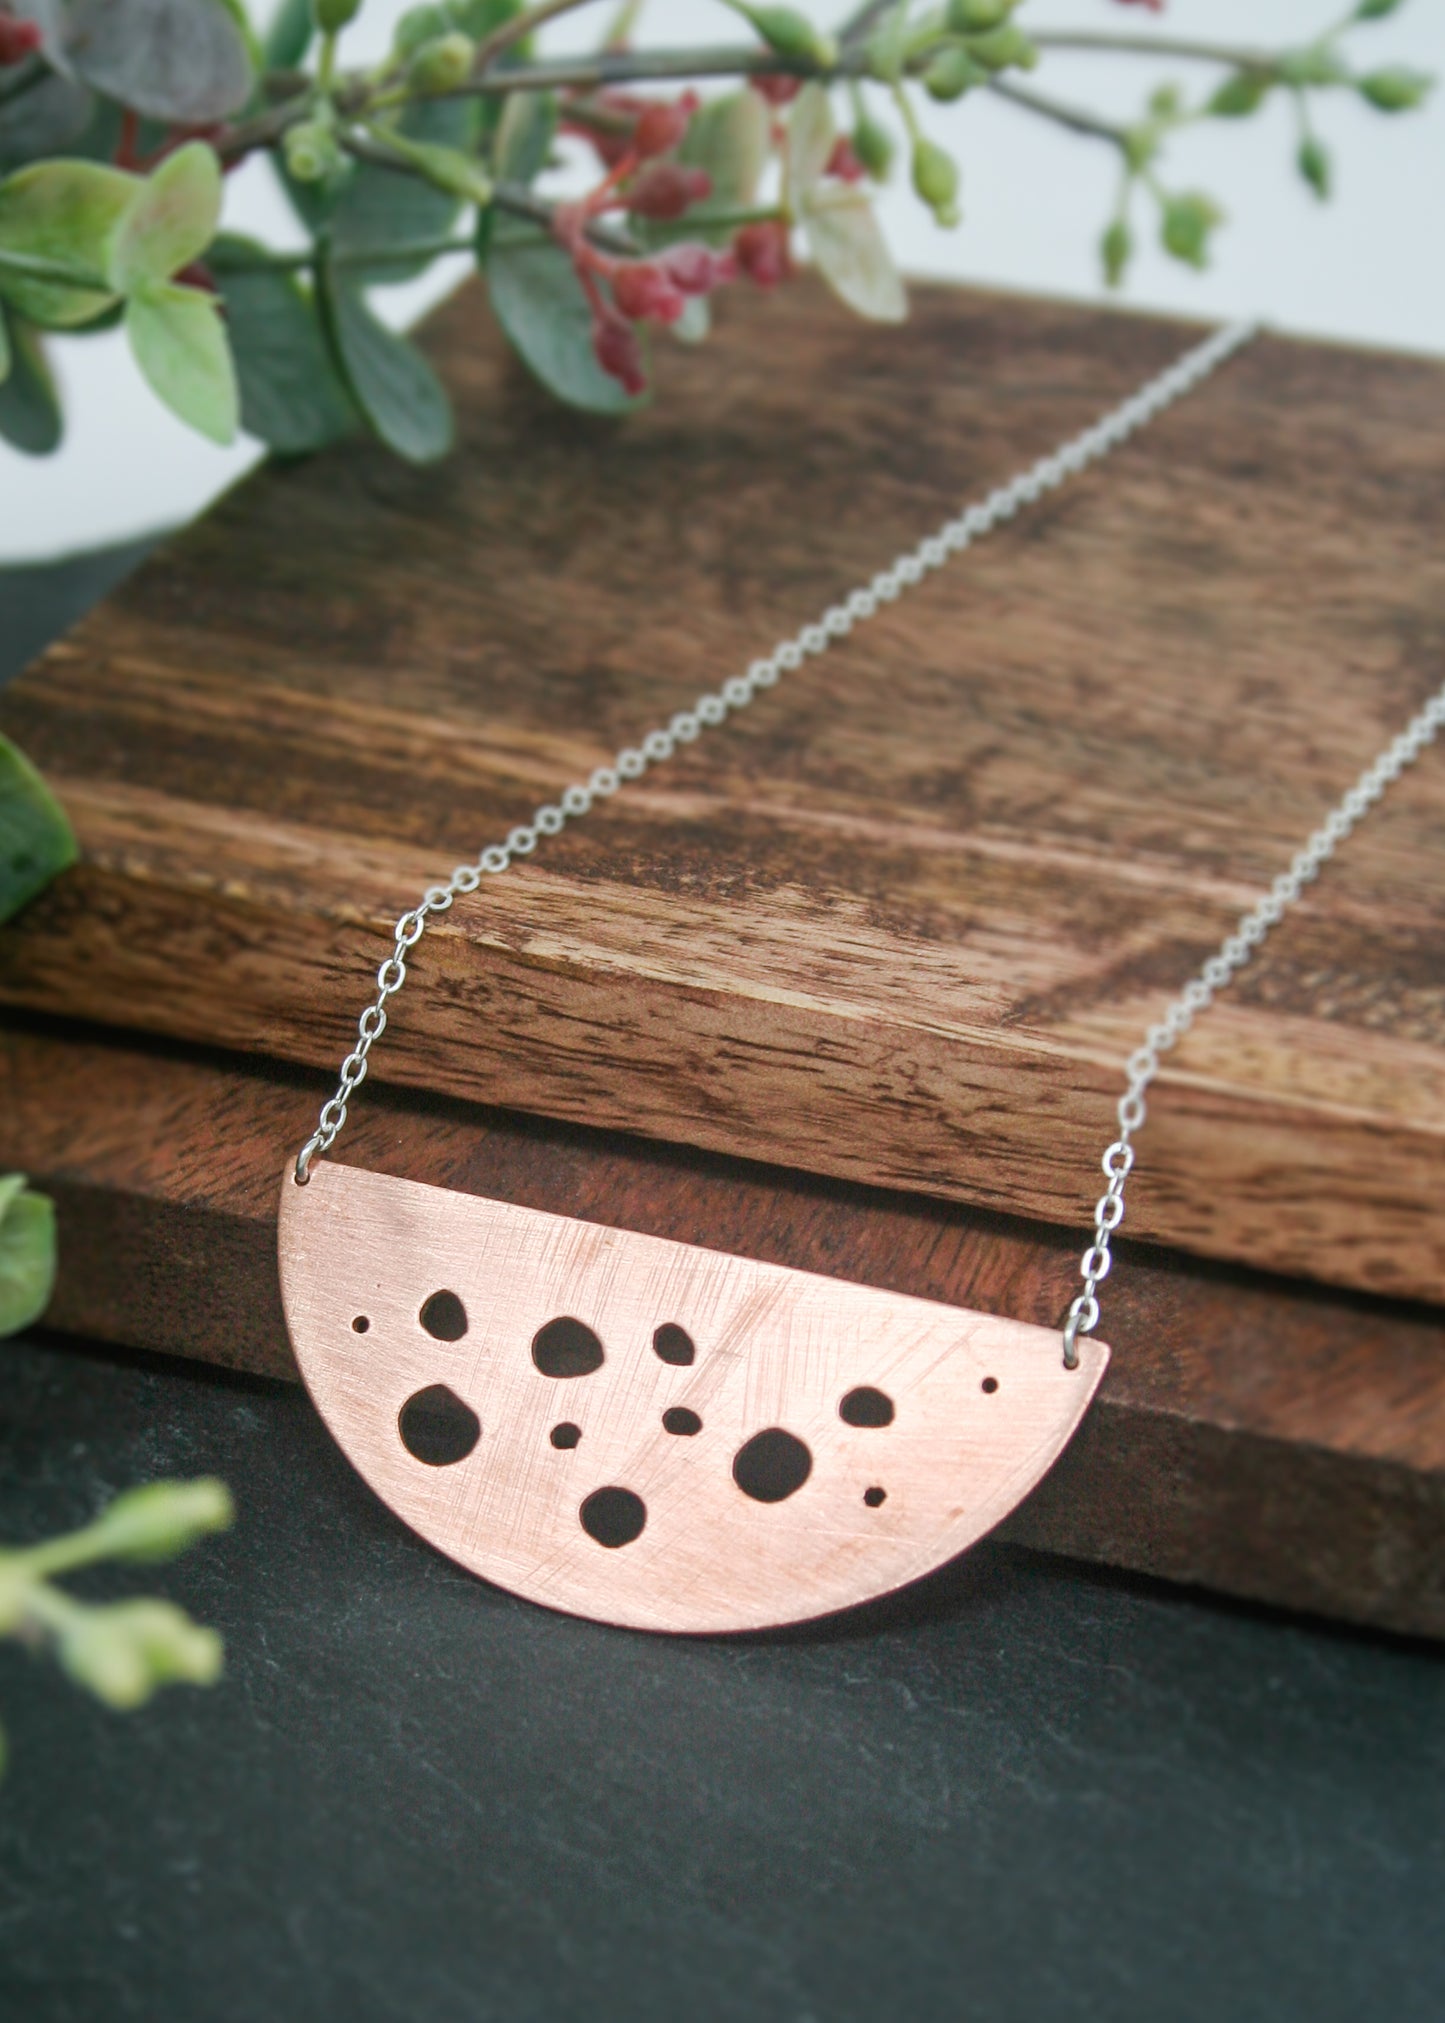 a metal necklace with holes in the middle of it